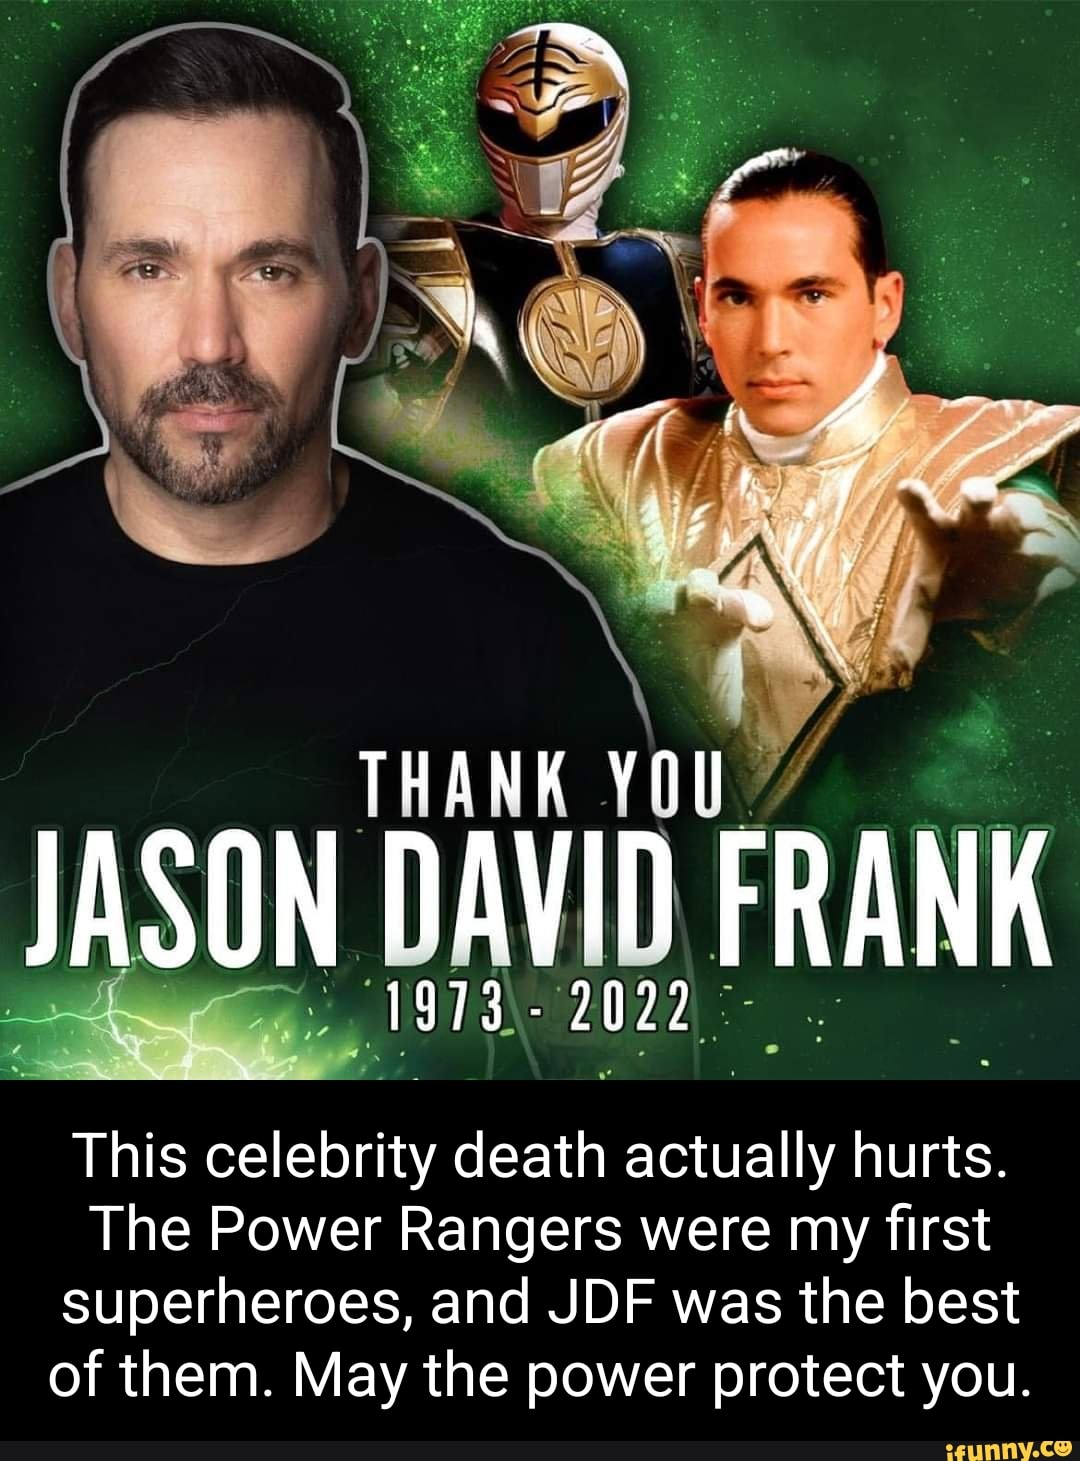 JASON DAVID FRANK - Official Fan Page - My new suit haha @50cent